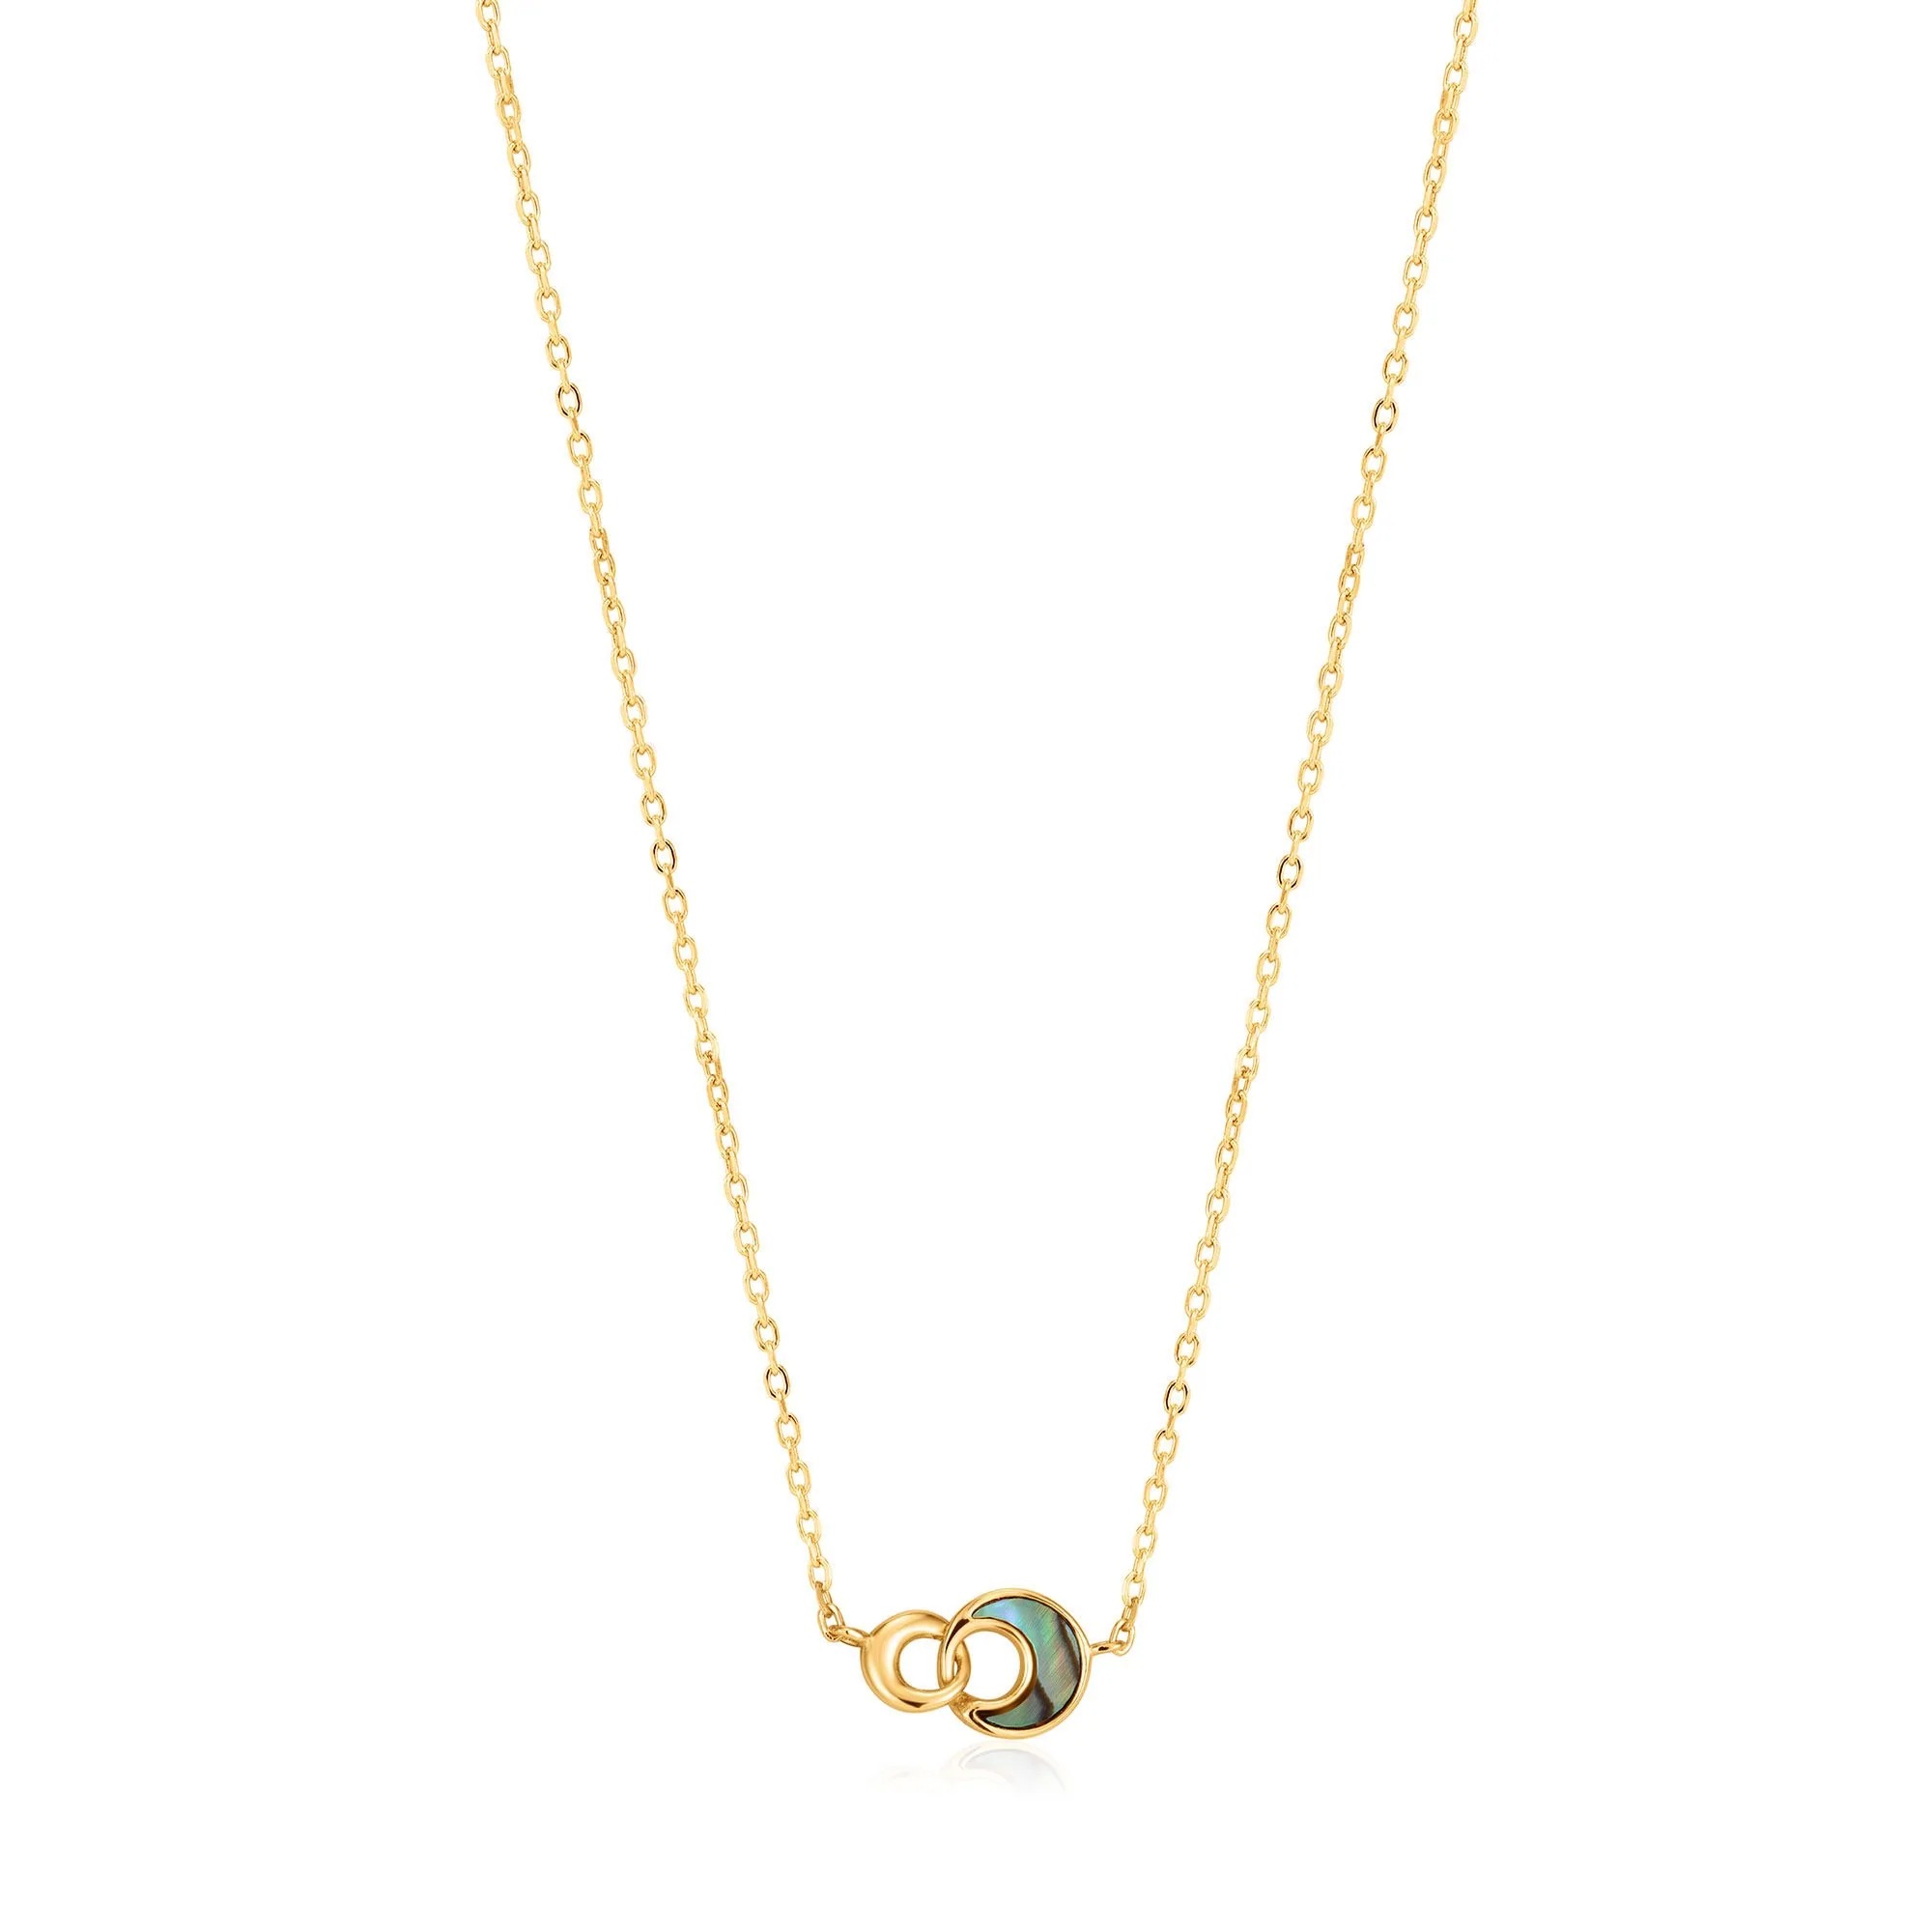 ANIA HAIE Tidal Abalone Crescent Link Necklace, Gold-plated